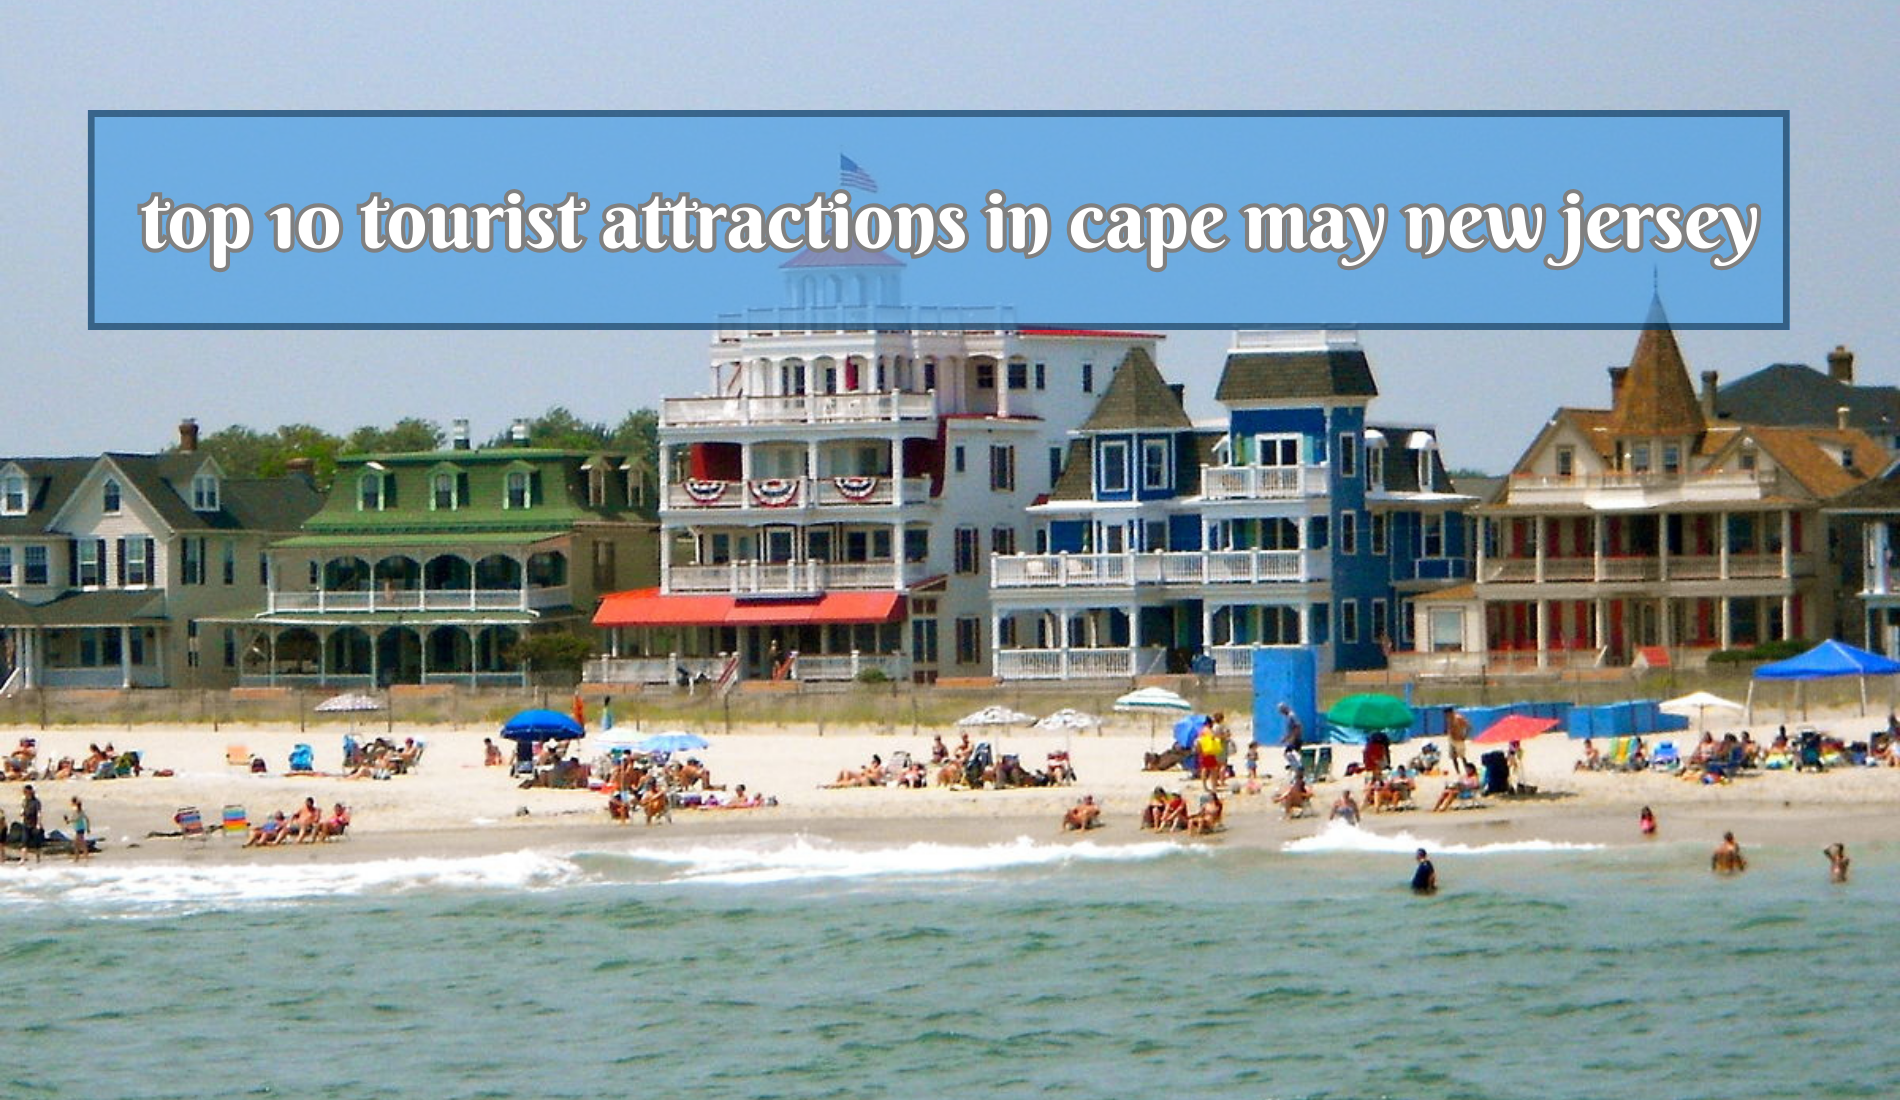 top 10 tourist attractions in cape may new jersey